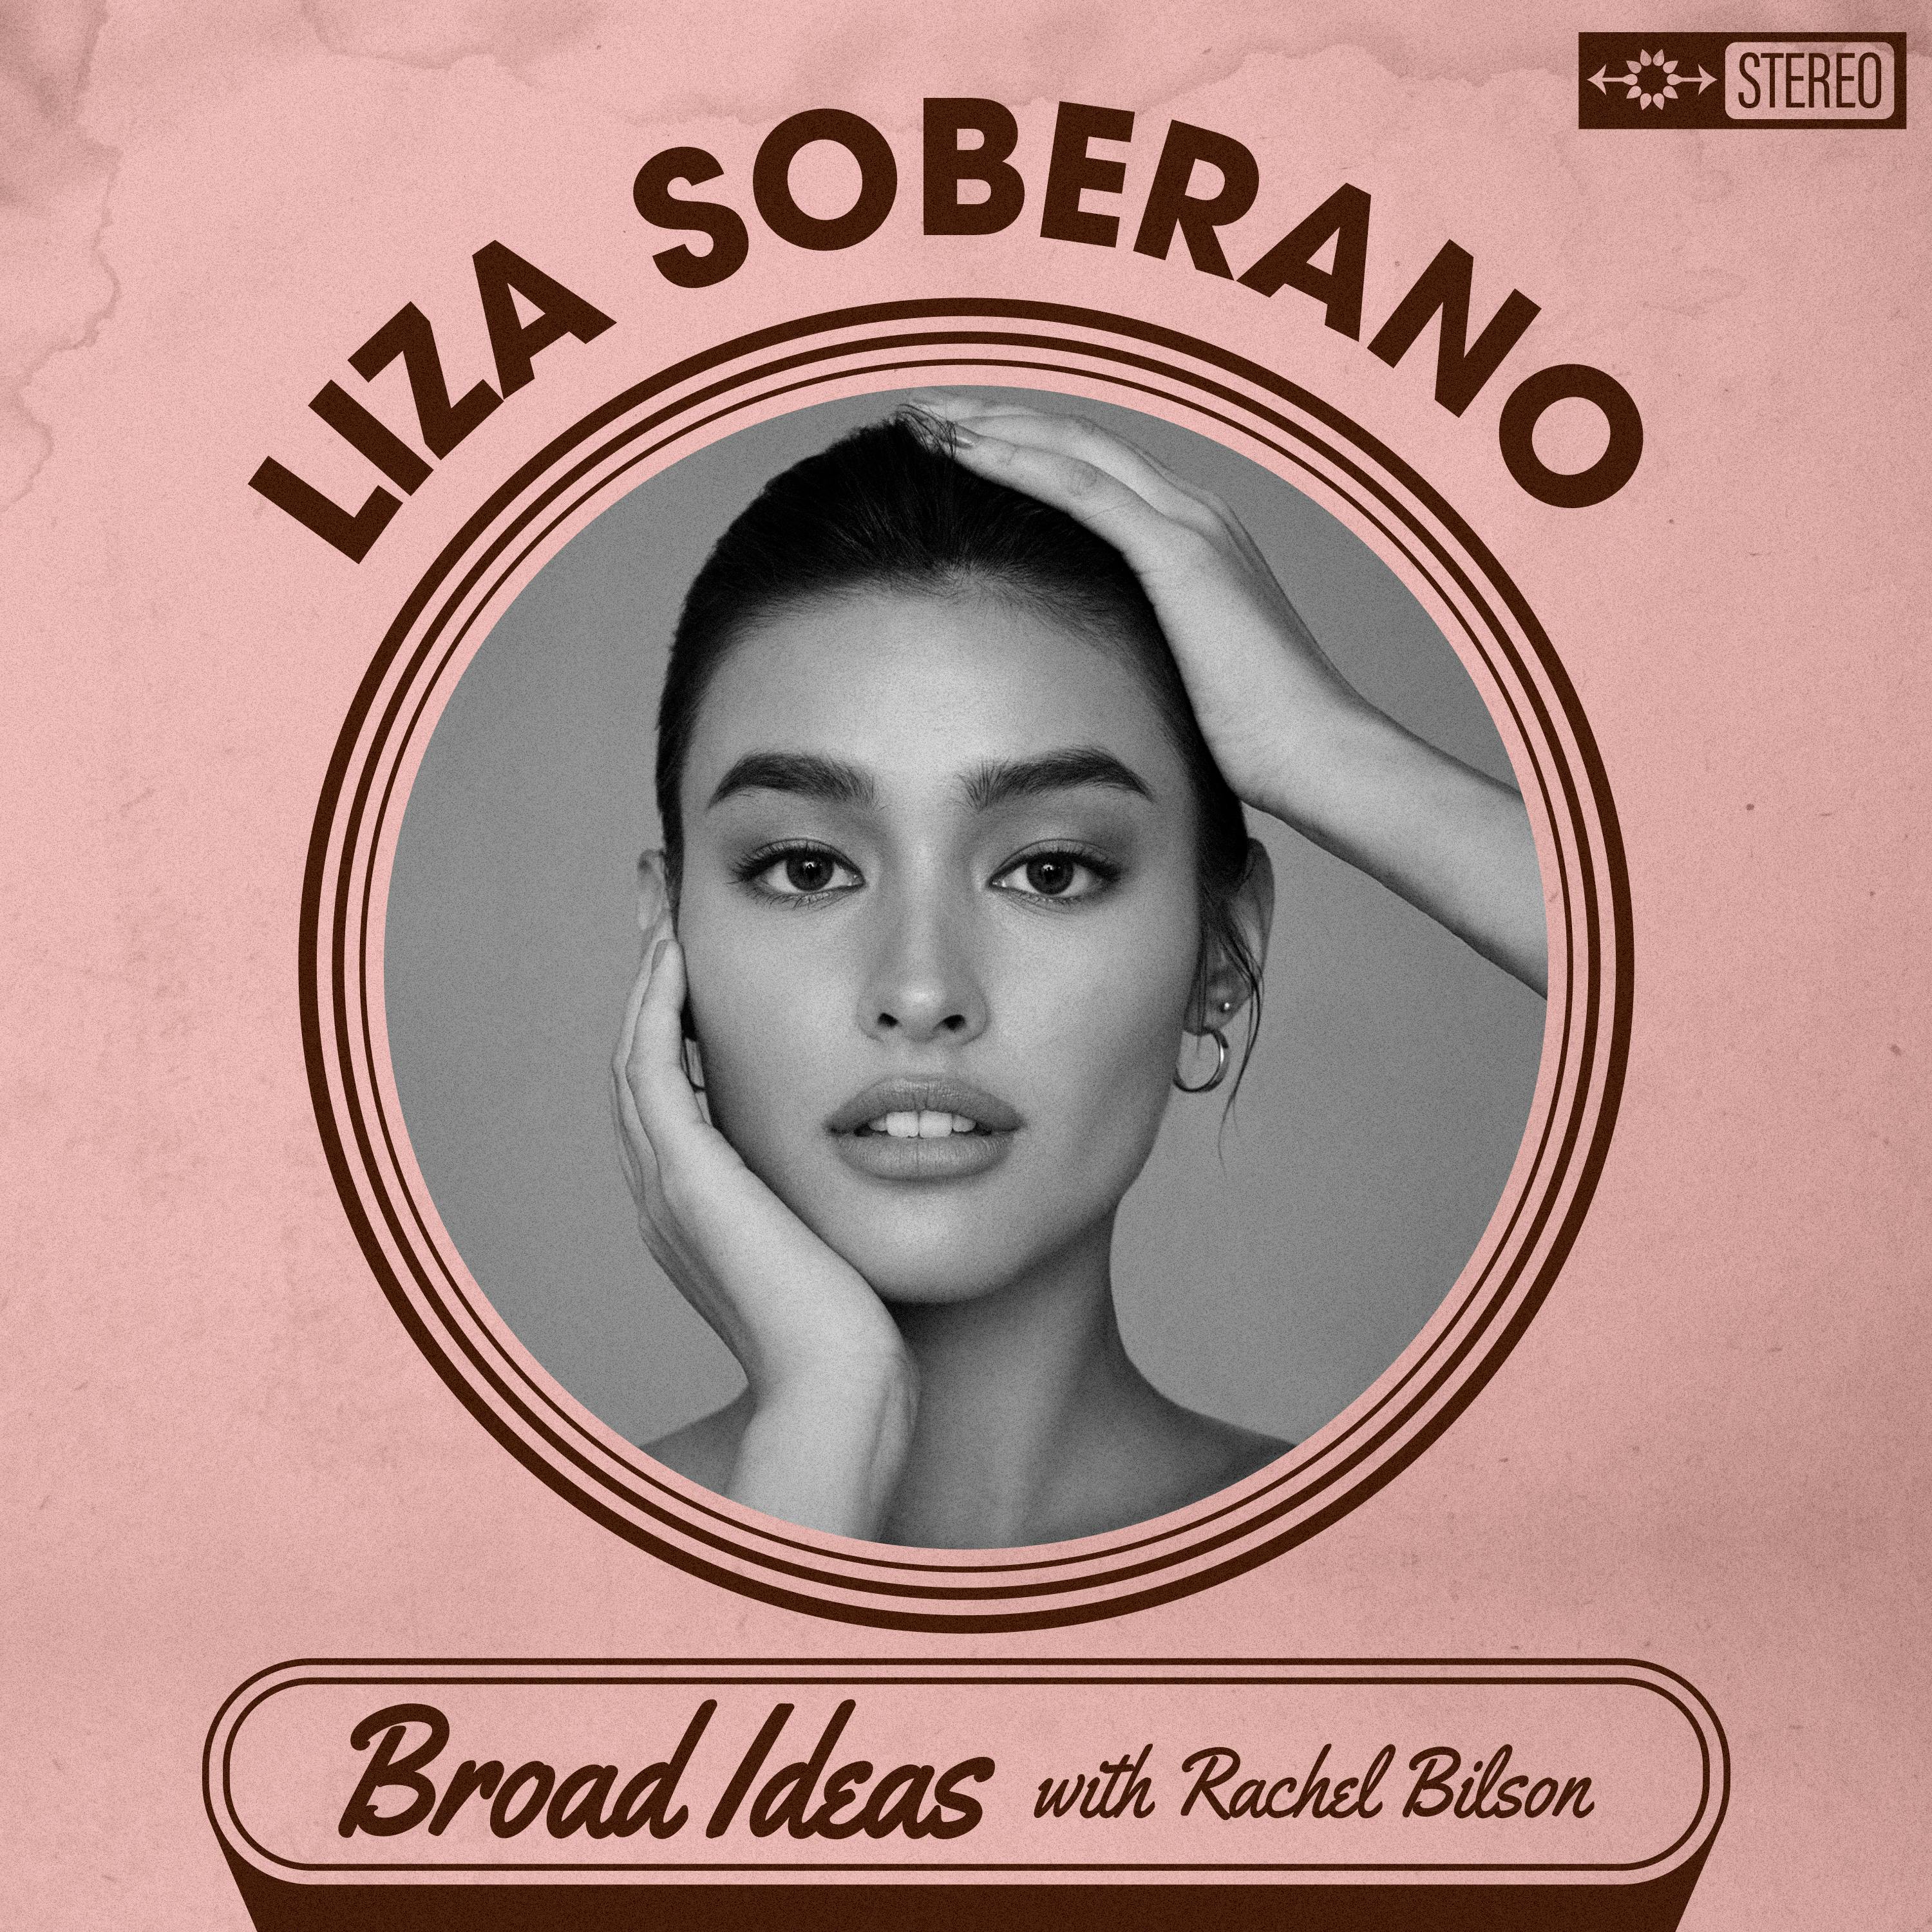 Liza Soberano on Mental Health, Lisa Frankenstein, and the Philippines